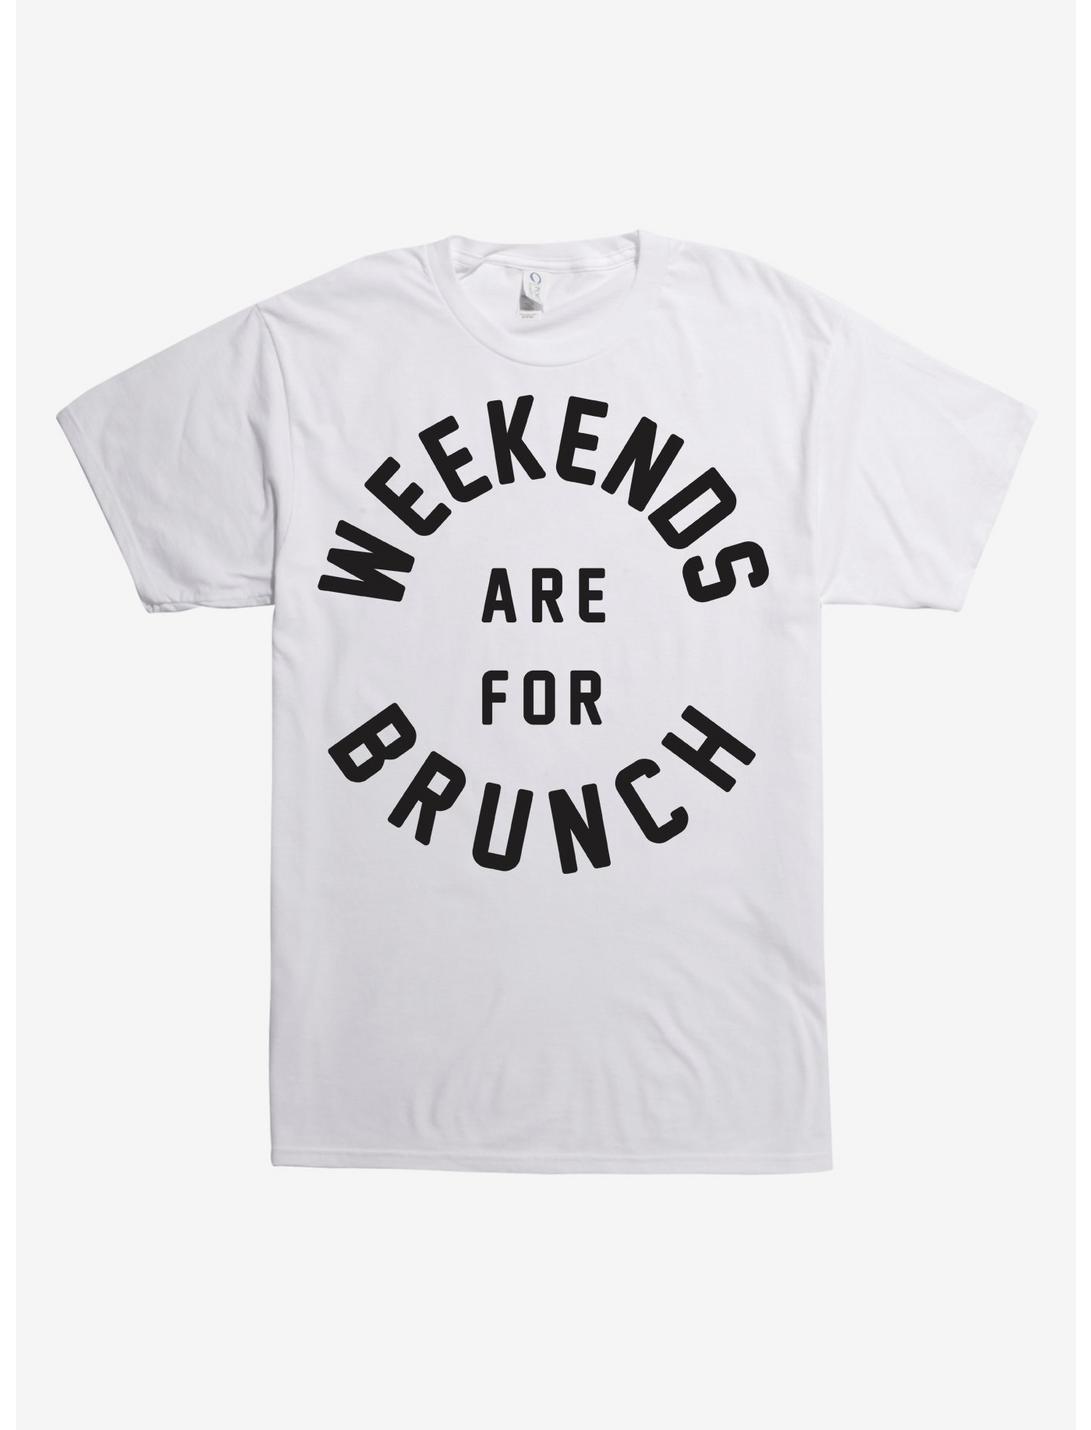 Weekends Are For Brunch T-Shirt, WHITE, hi-res